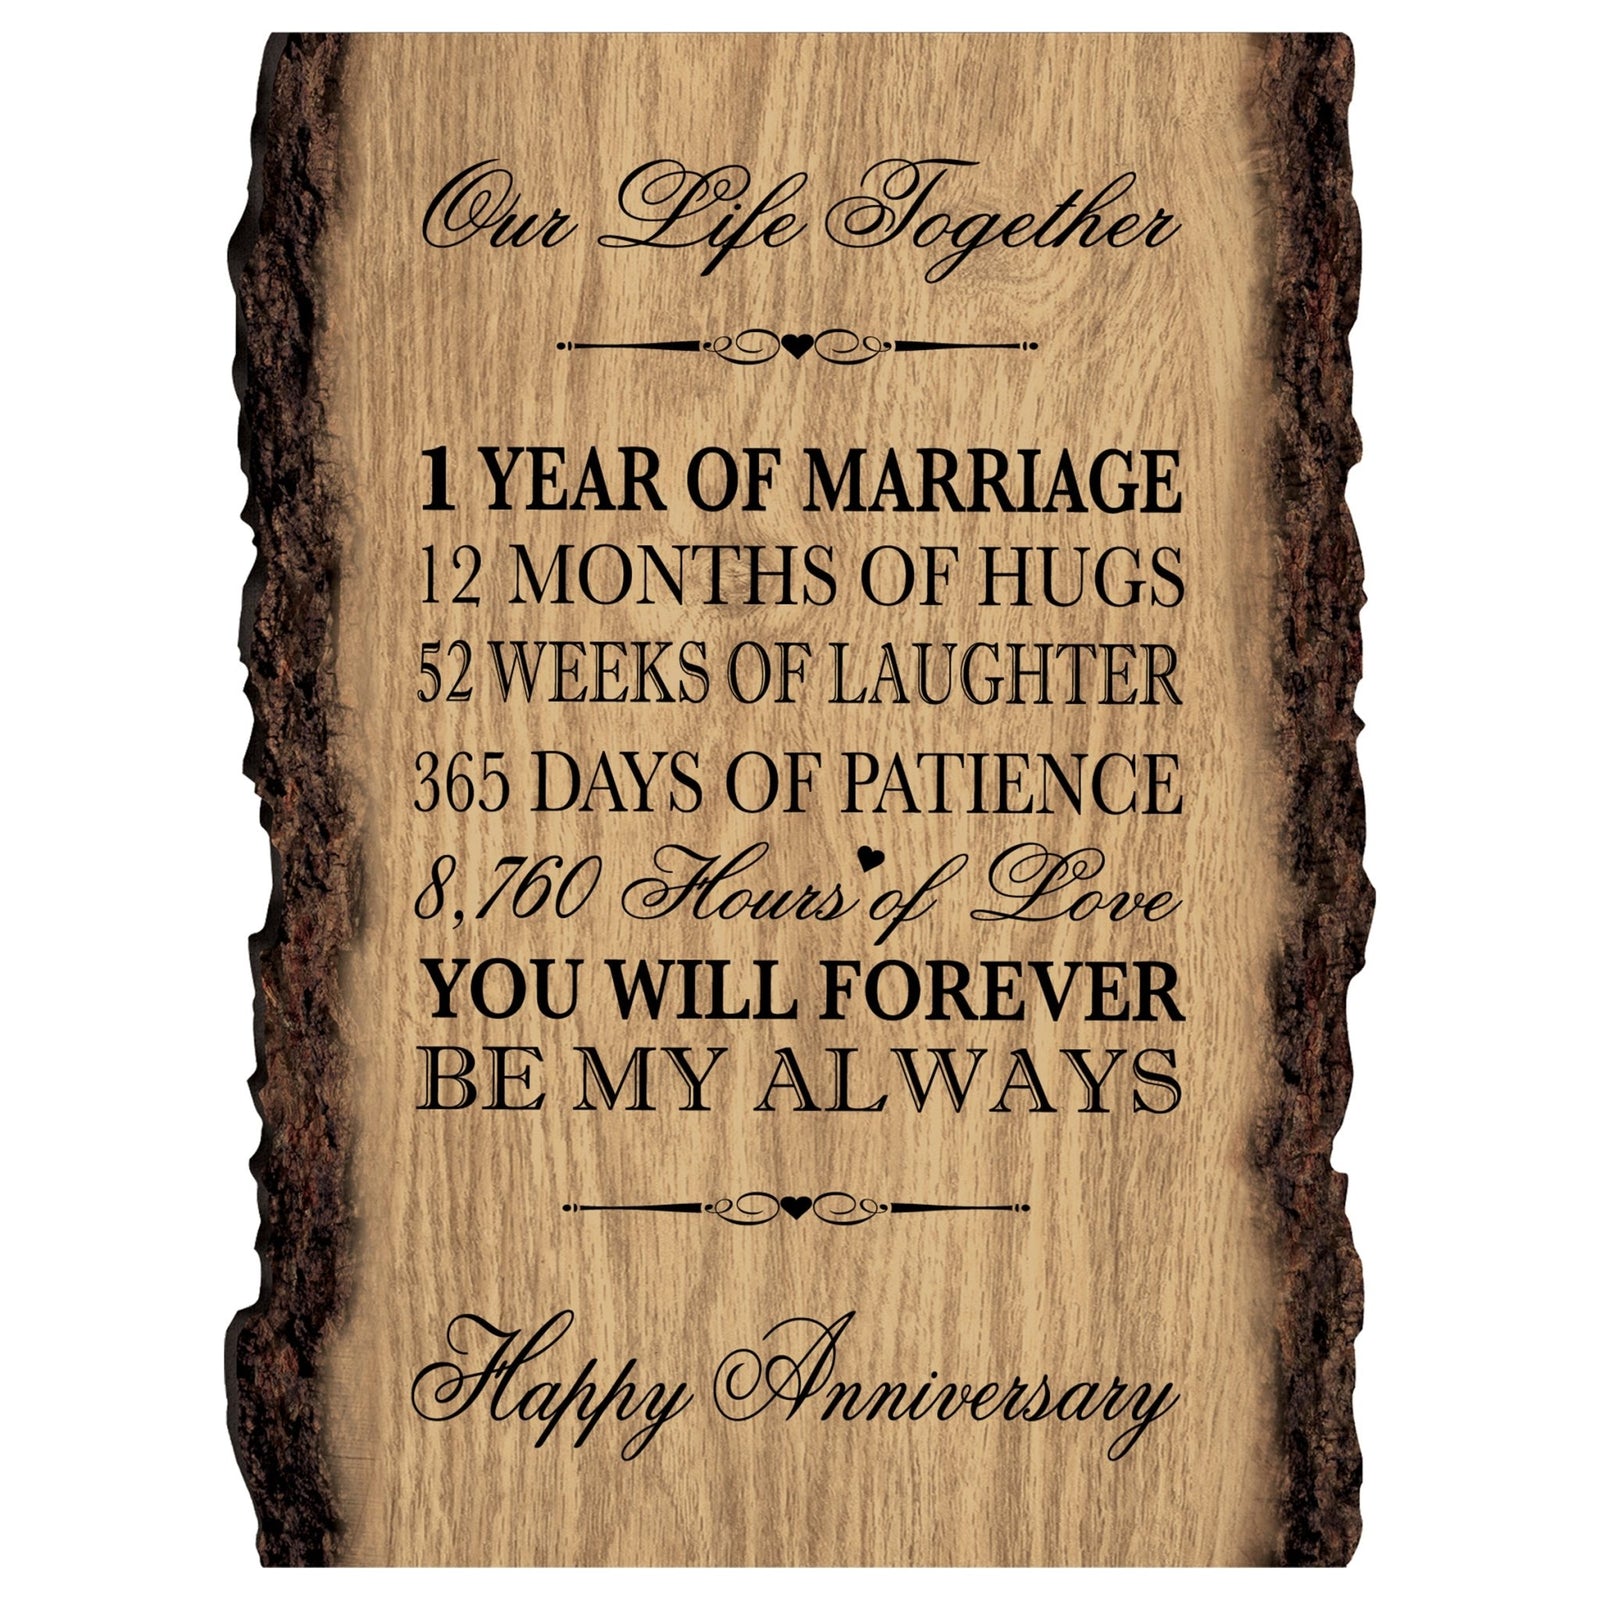 Rustic Wedding Anniversary 9x12 Barky Wall Plaque Gift For Parents, Grandparents New Couple - 1 Year Of Marriage - LifeSong Milestones